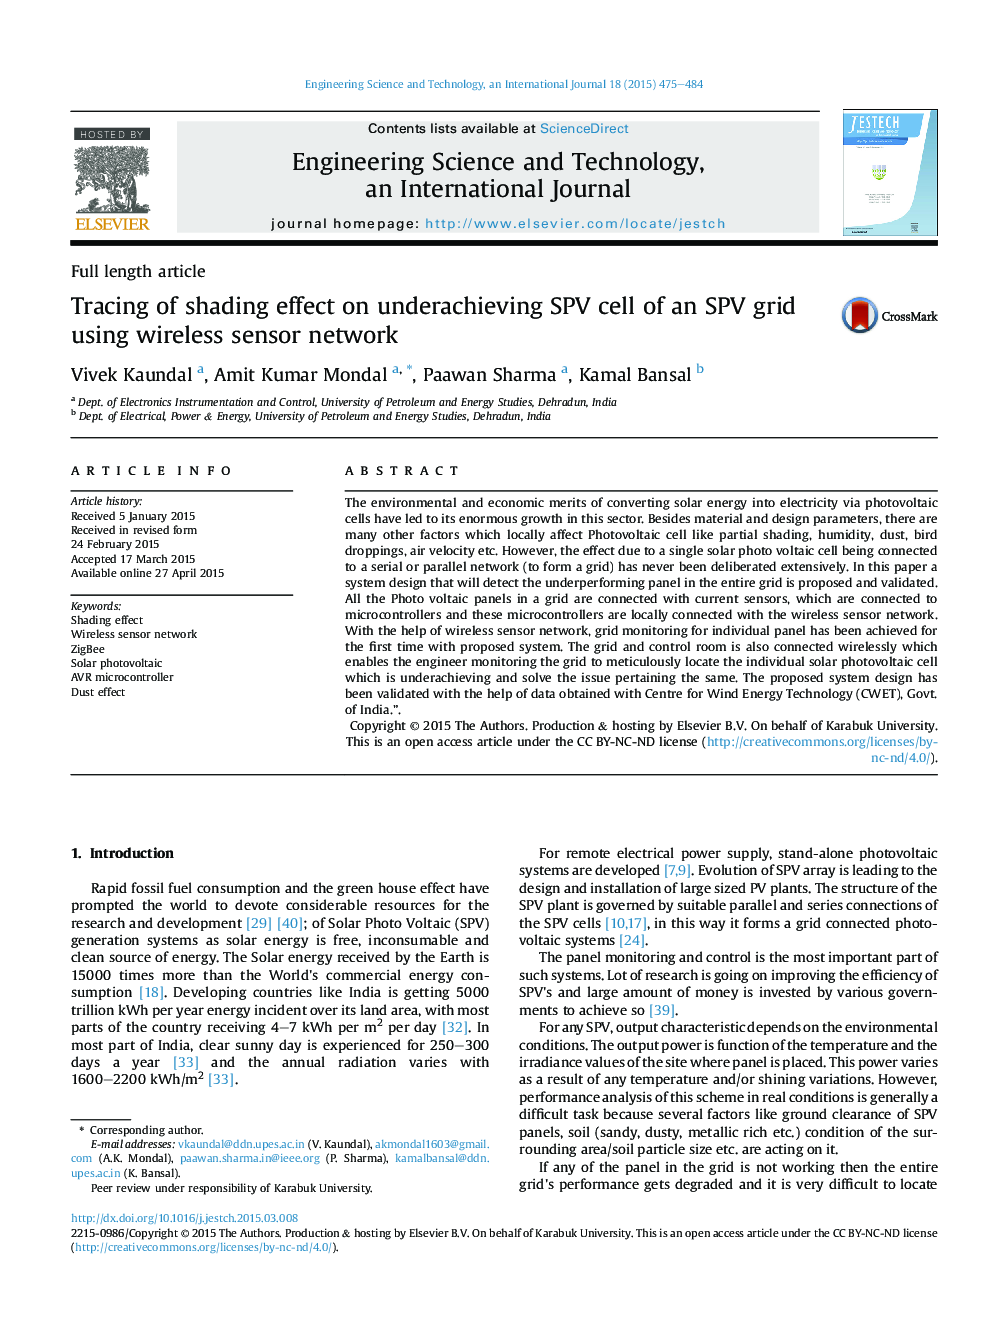 Tracing of shading effect on underachieving SPV cell of an SPV grid using wireless sensor network 